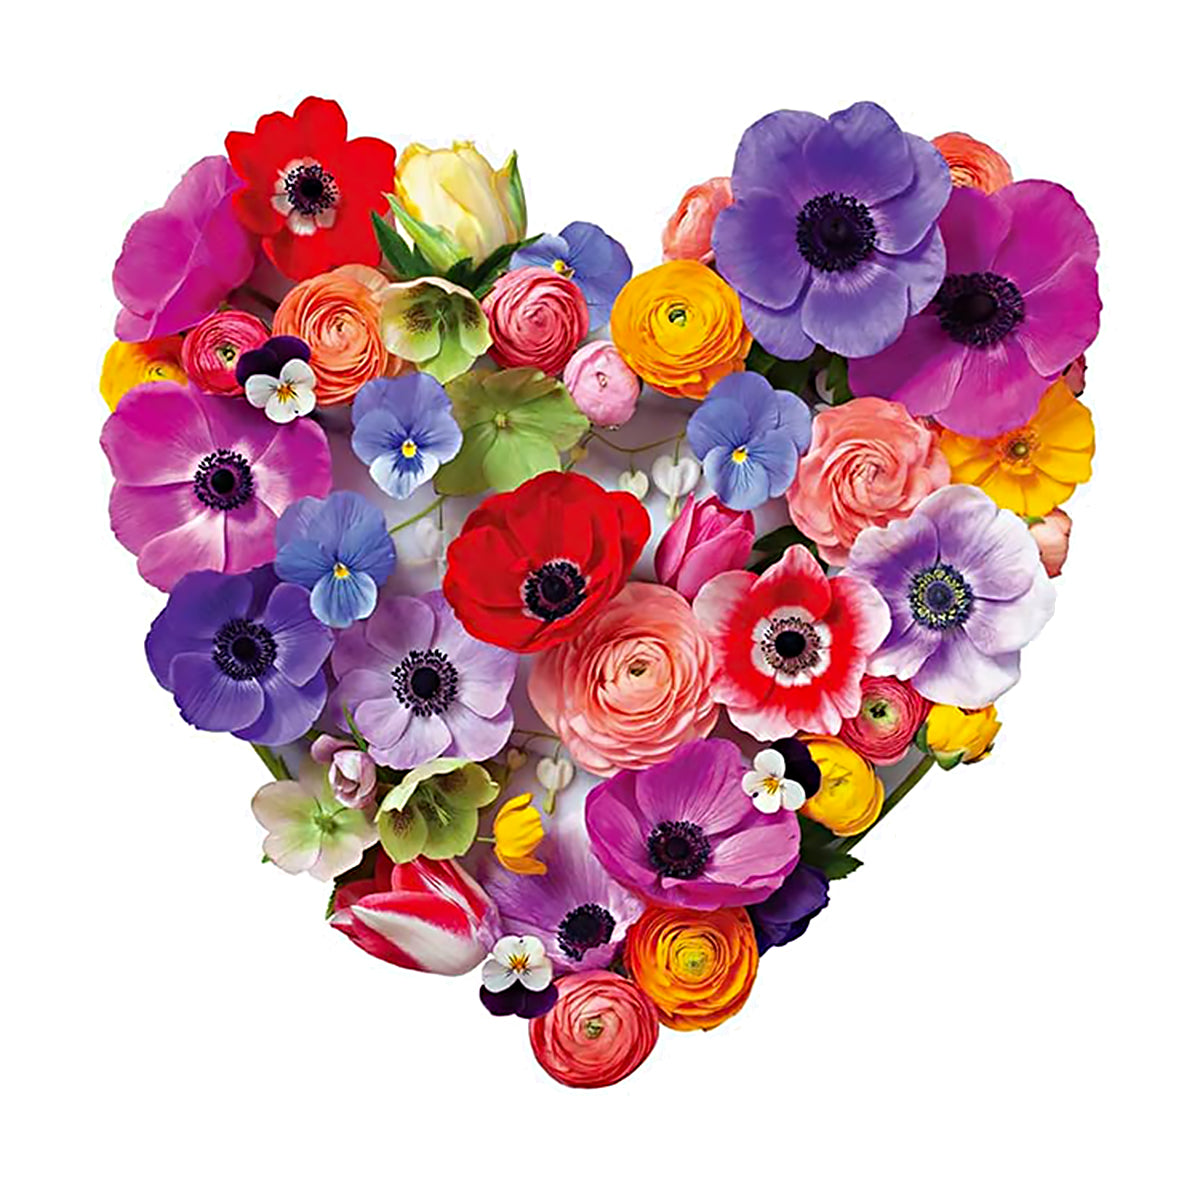 The Flora Heart Puzzle from Galison is a colourful and artistic masterpiece. Designed by artist Julie Seabrook, this 750-piece jigsaw features a heart-shaped arrangement of stunning flower blooms, making it an ideal gift for Valentine's Day.